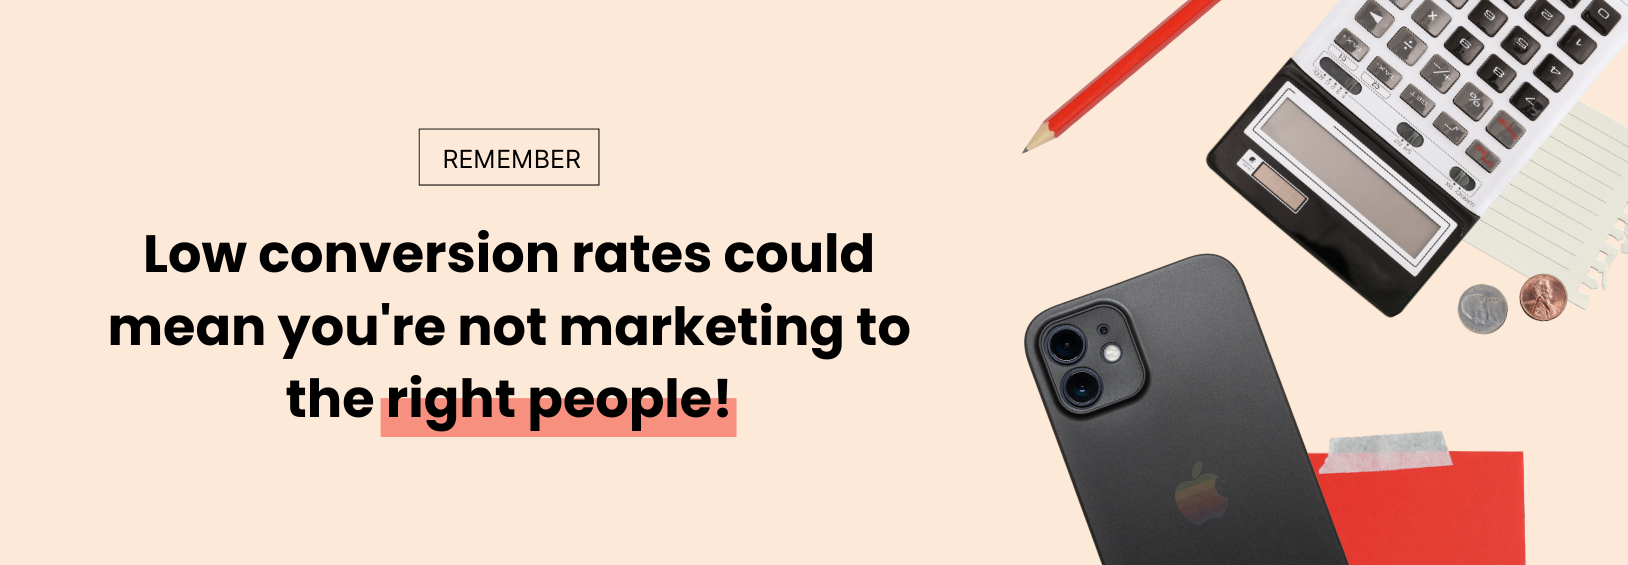 Low conversion rates could mean you're not marketing to the right people!